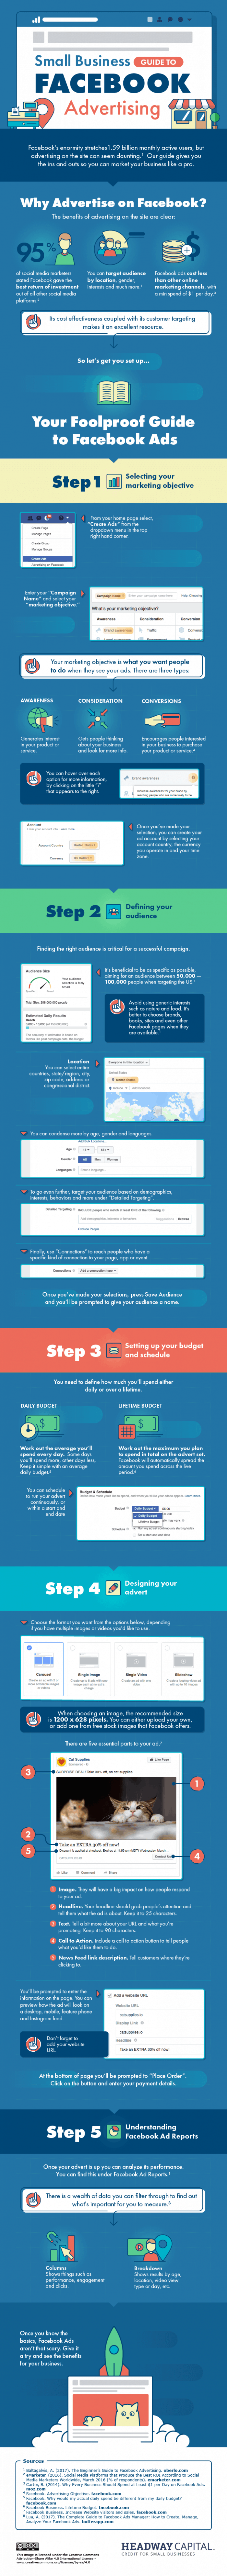 Infographic showing a short guide on how to advertise on Facebook as a small business owner